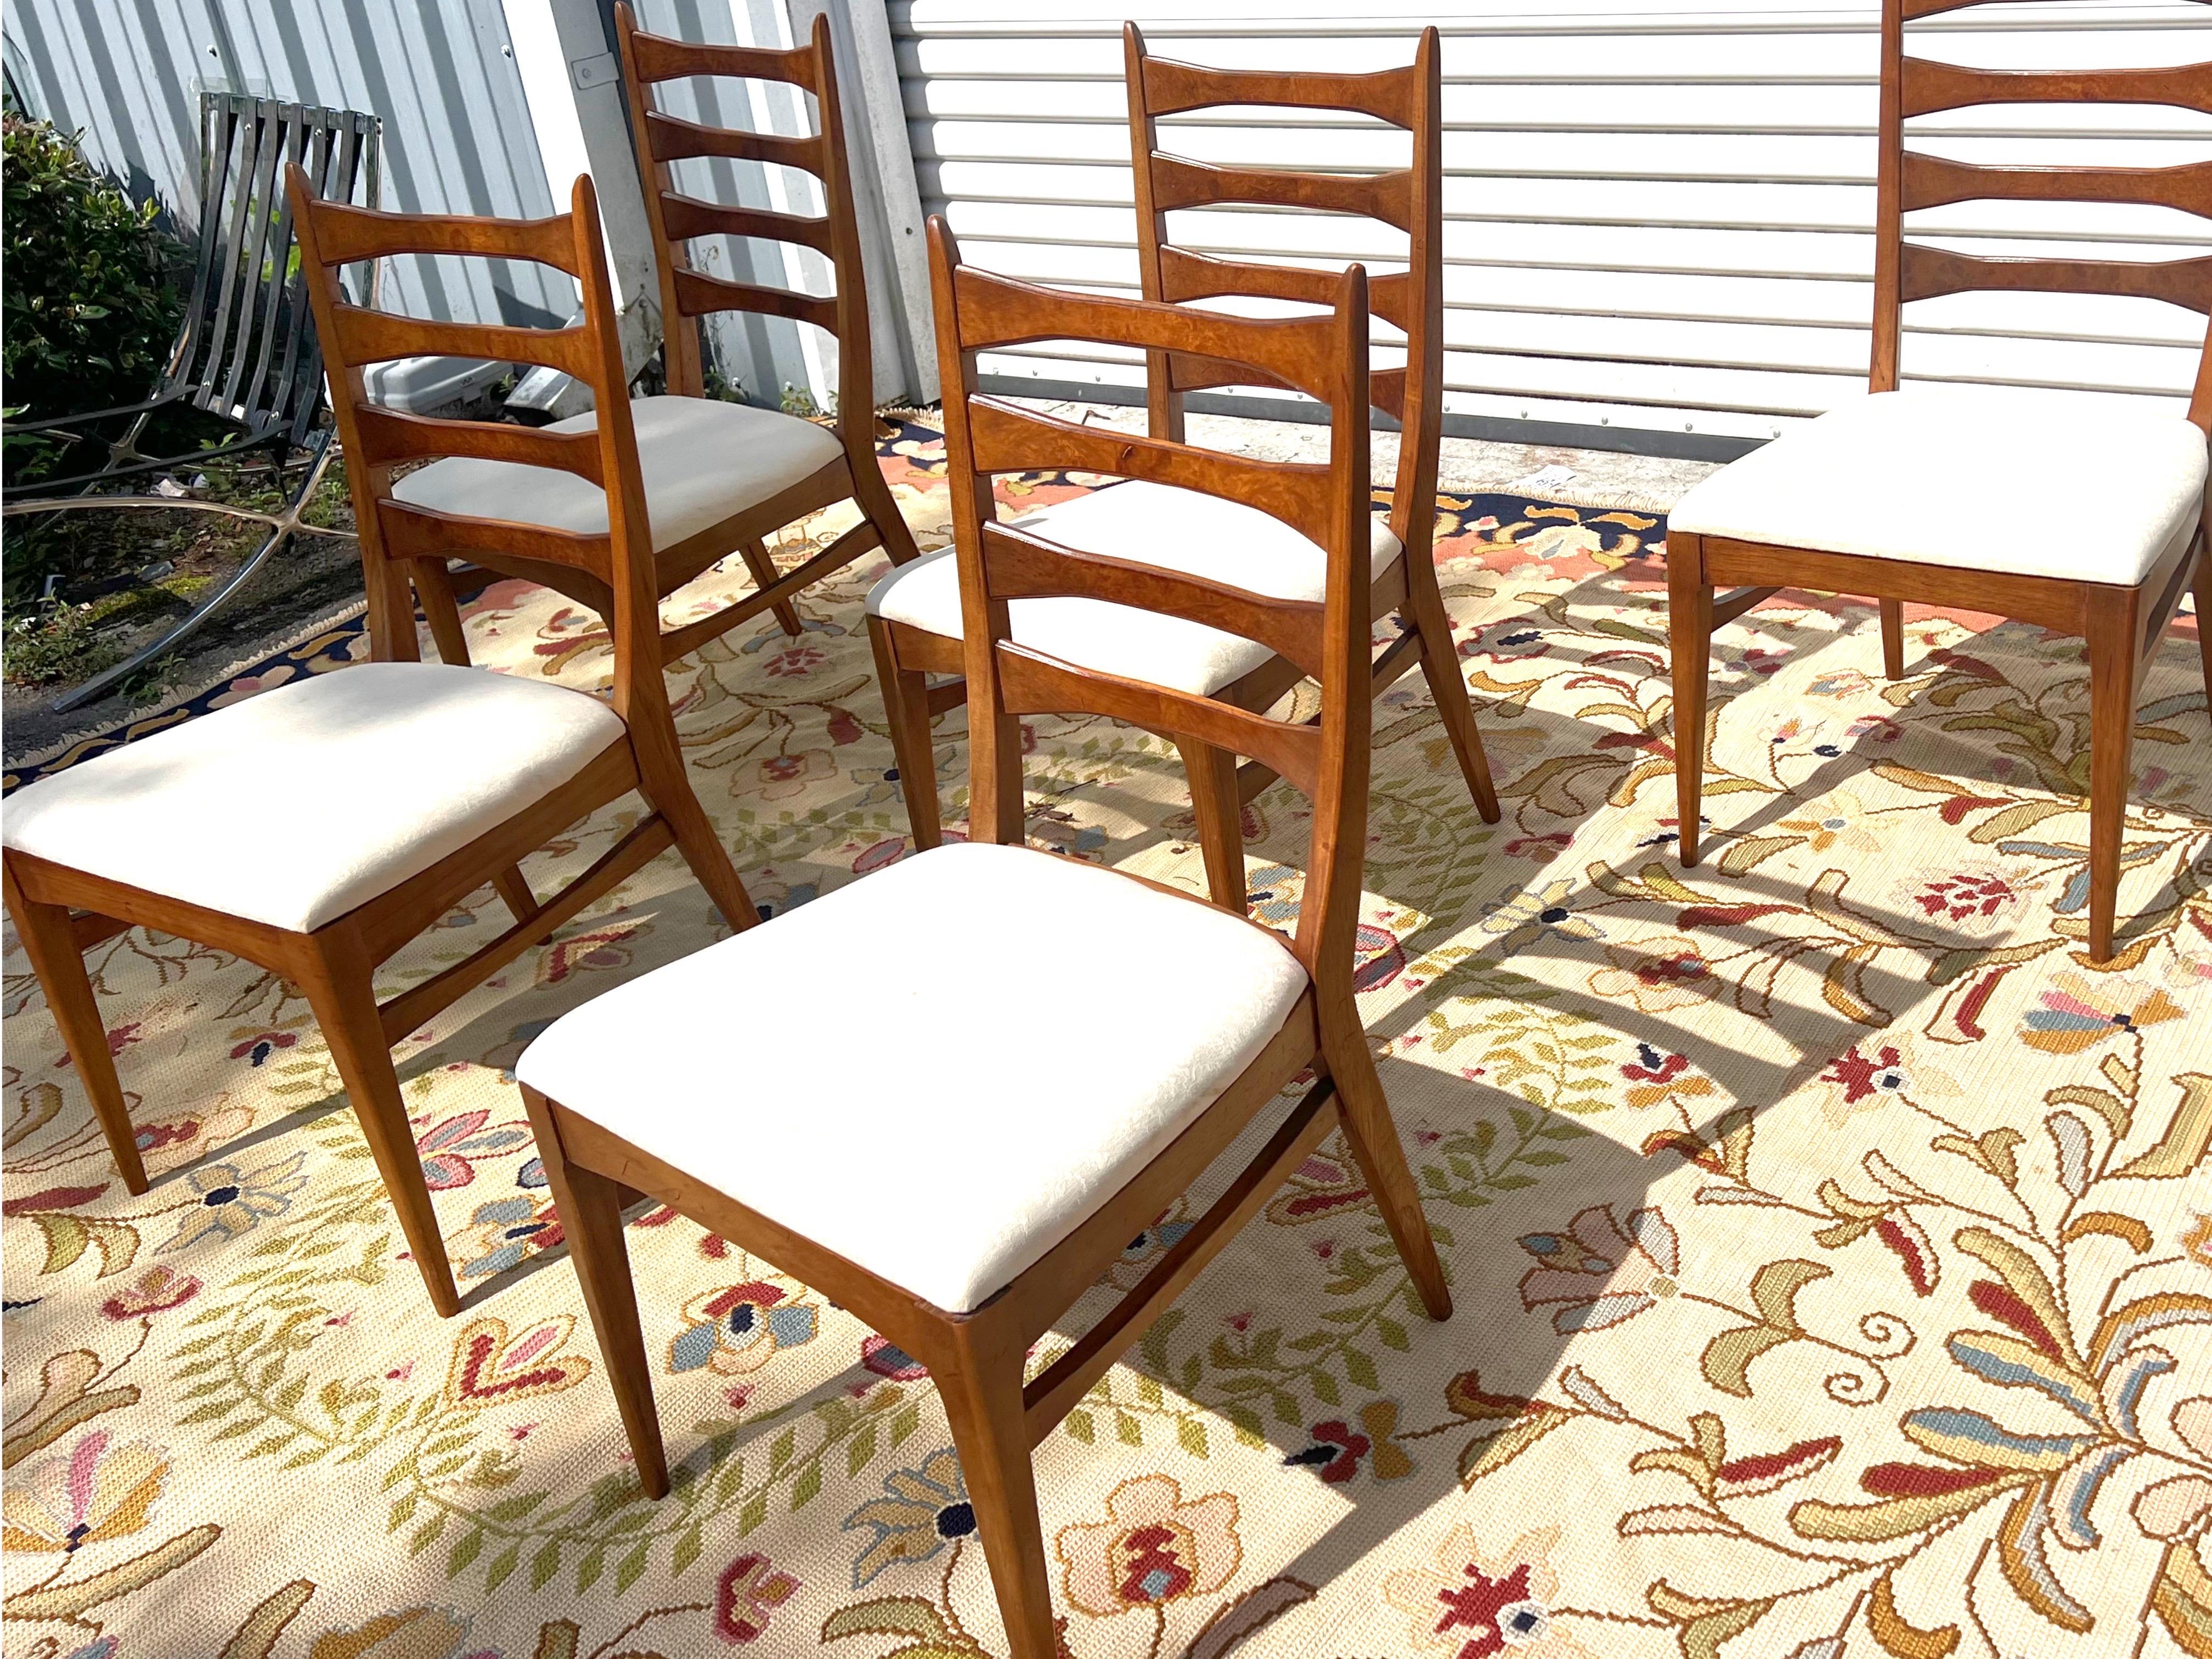 Mid-Century Modern burrled back cat eye/ladder back dining chairs Chairs in the style of kent Coffey/Brown Saltman. These chairs are unique with the burl finish on the backs as well as the swooping stretcher that connects the front chair legs to the